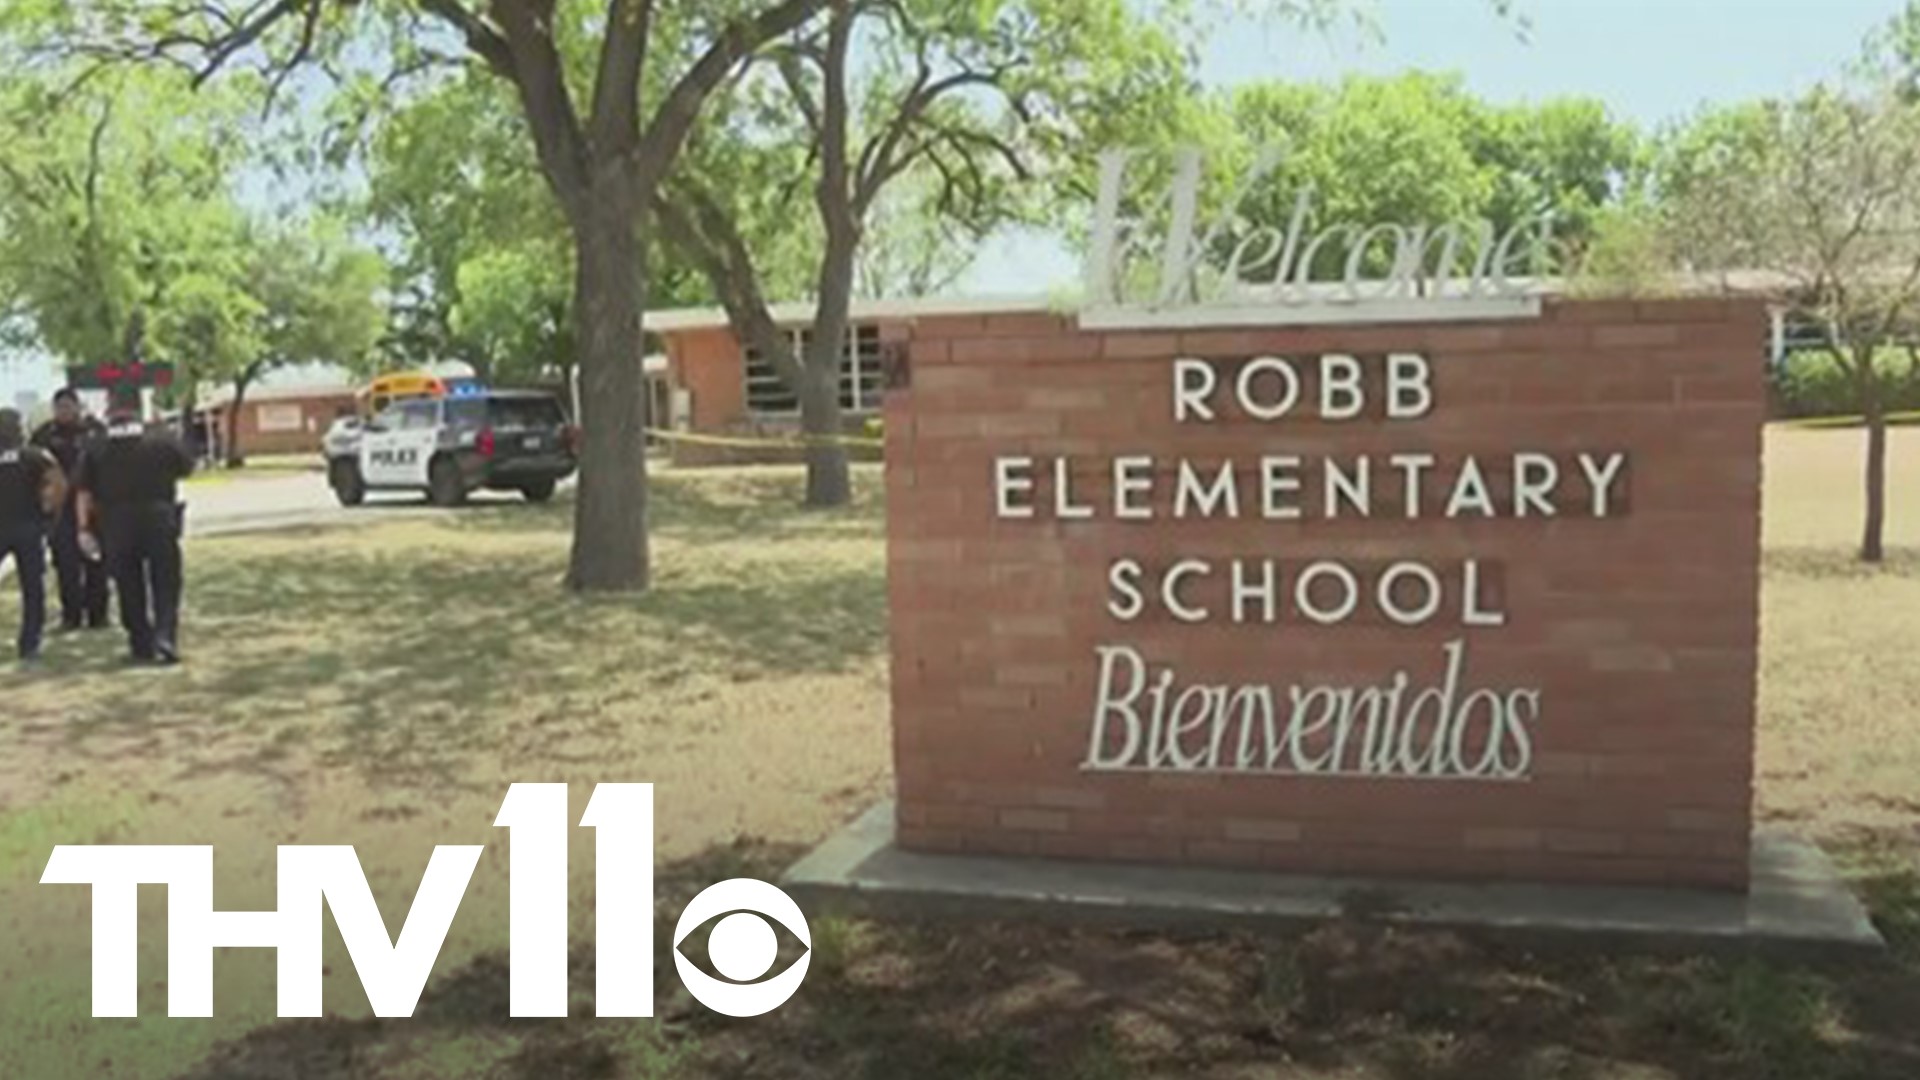 As news spread of the Robb Elementary School shooting, Arkansas was in the midst of the primary election. Candidates and state leaders speaking of the tragedy.